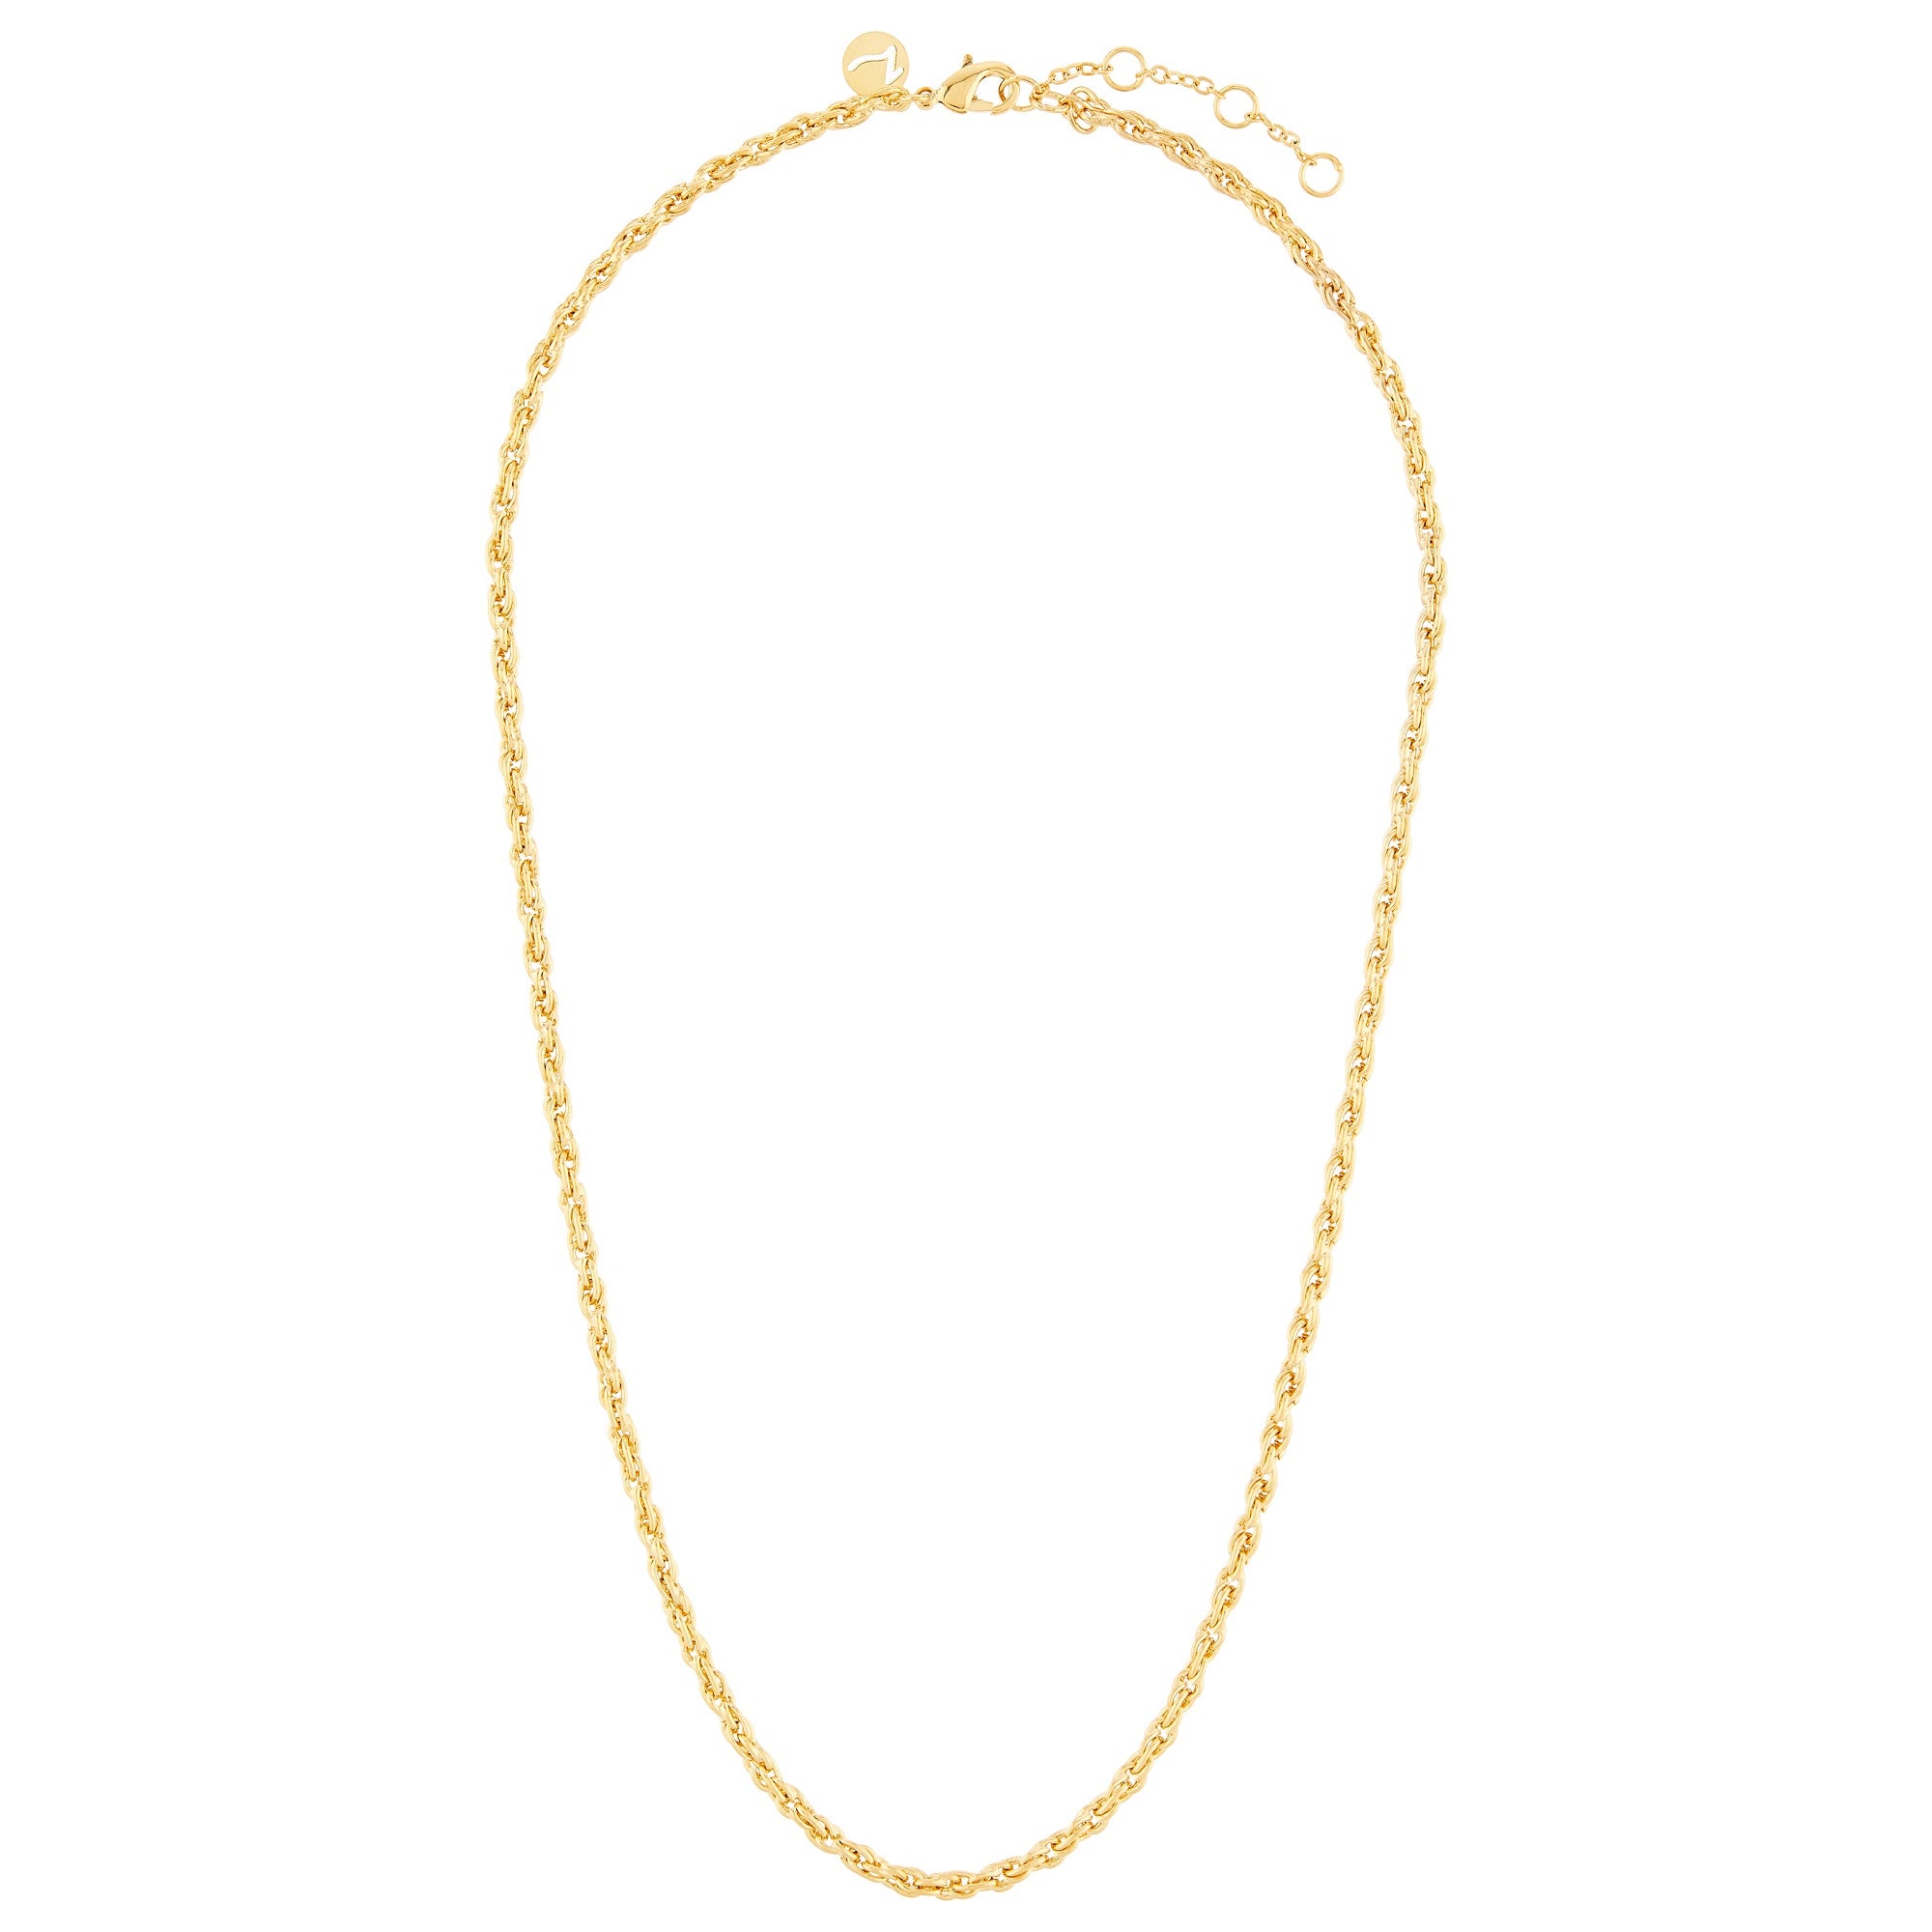 Accessorize London Gold-Plated Celestial Necklace